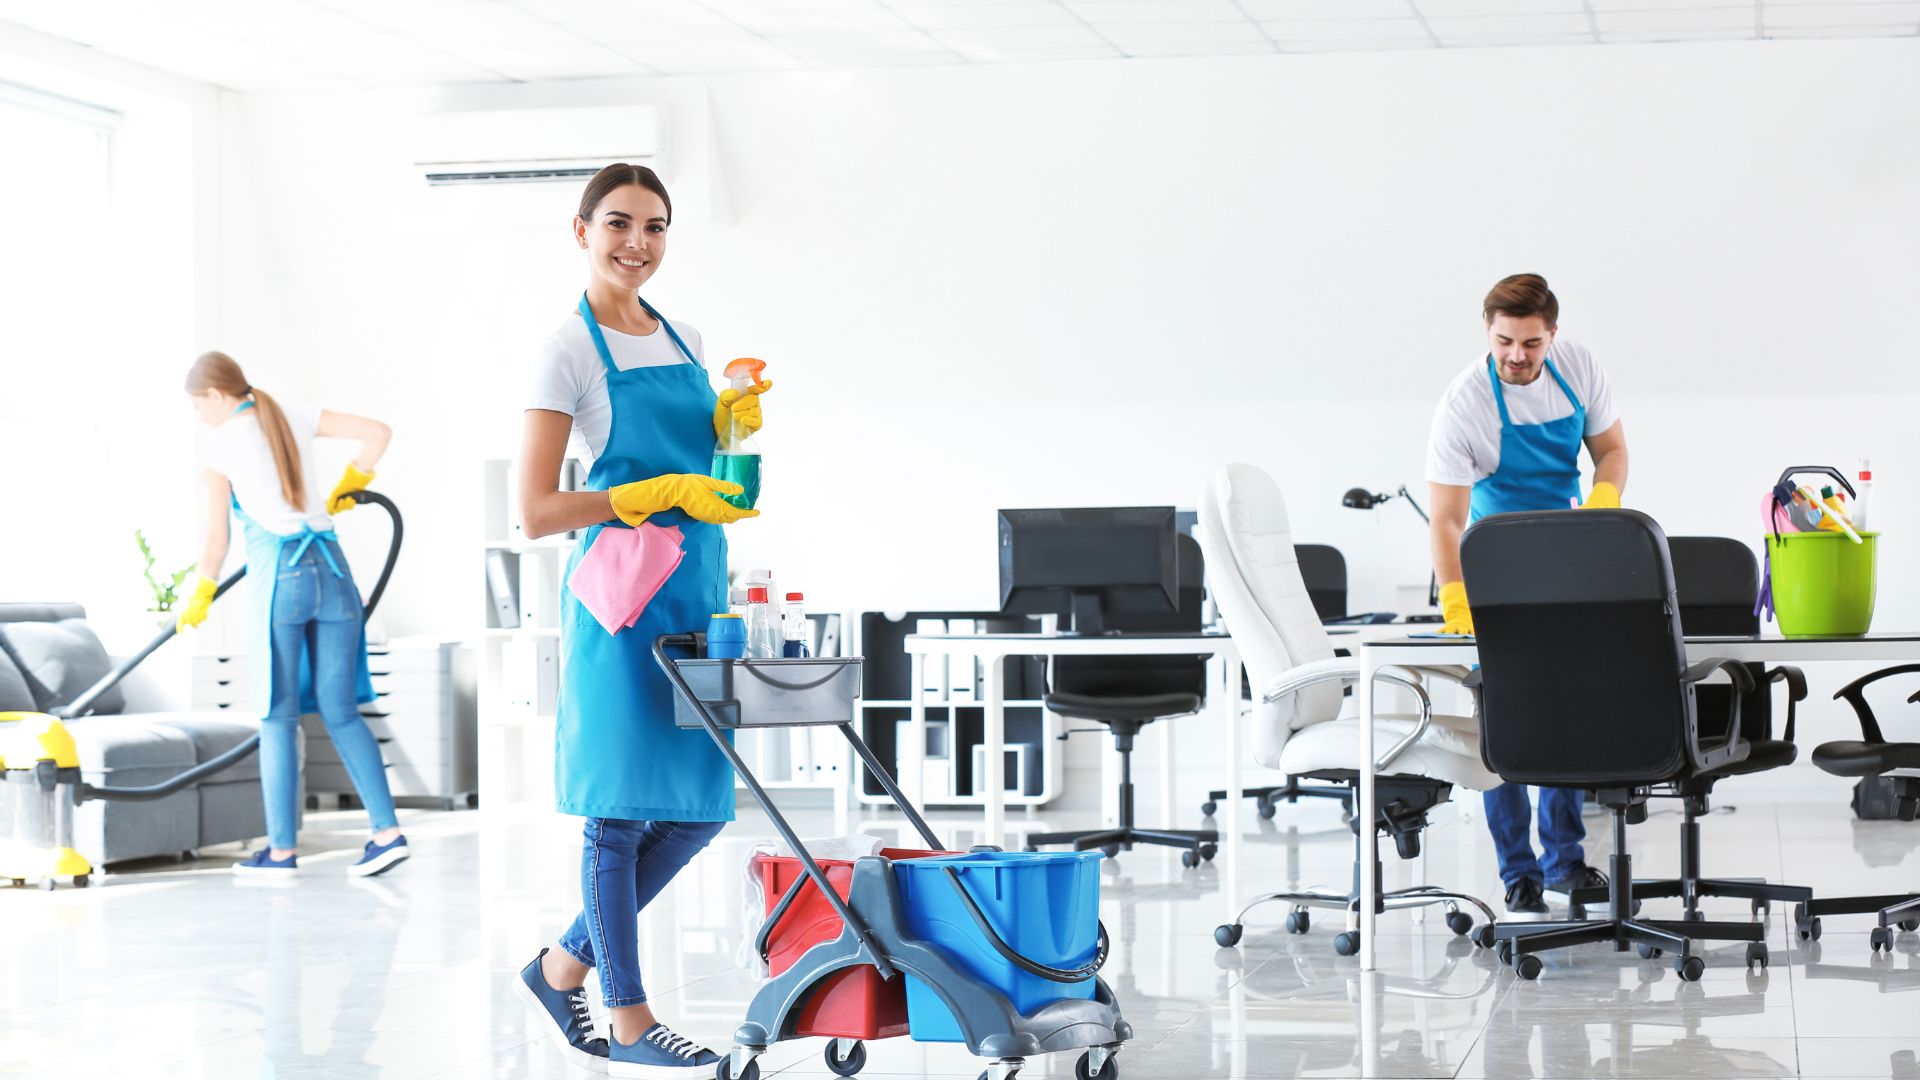 3 Cleaners in an office